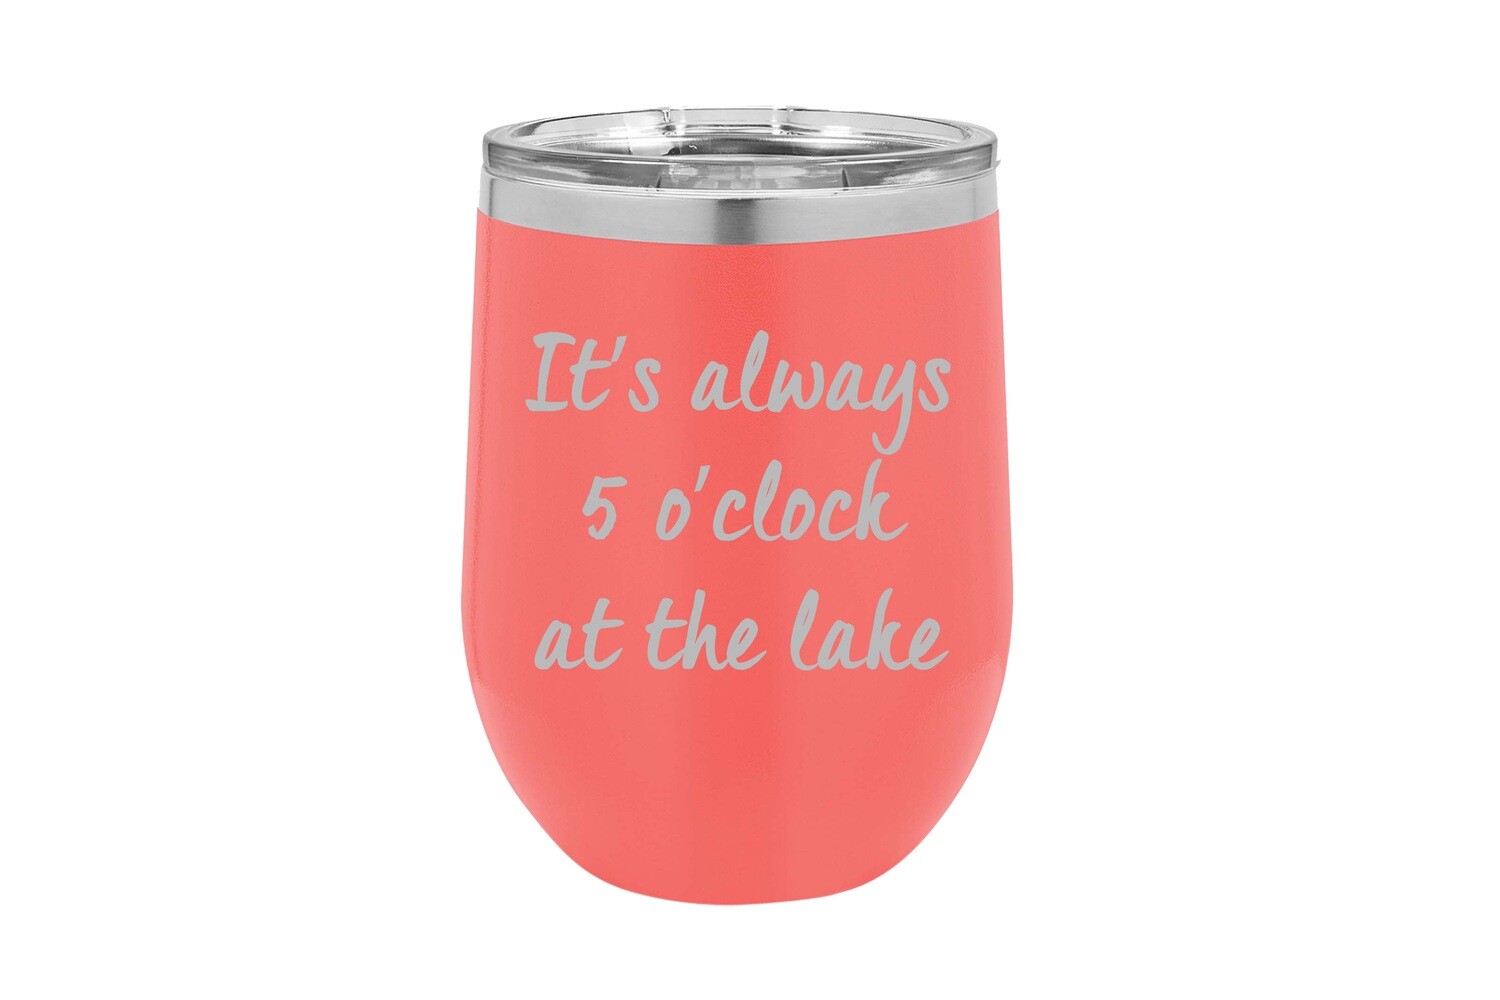 It's Always 5 O'clock at the Lake/Beach Insulated Tumbler 12 oz